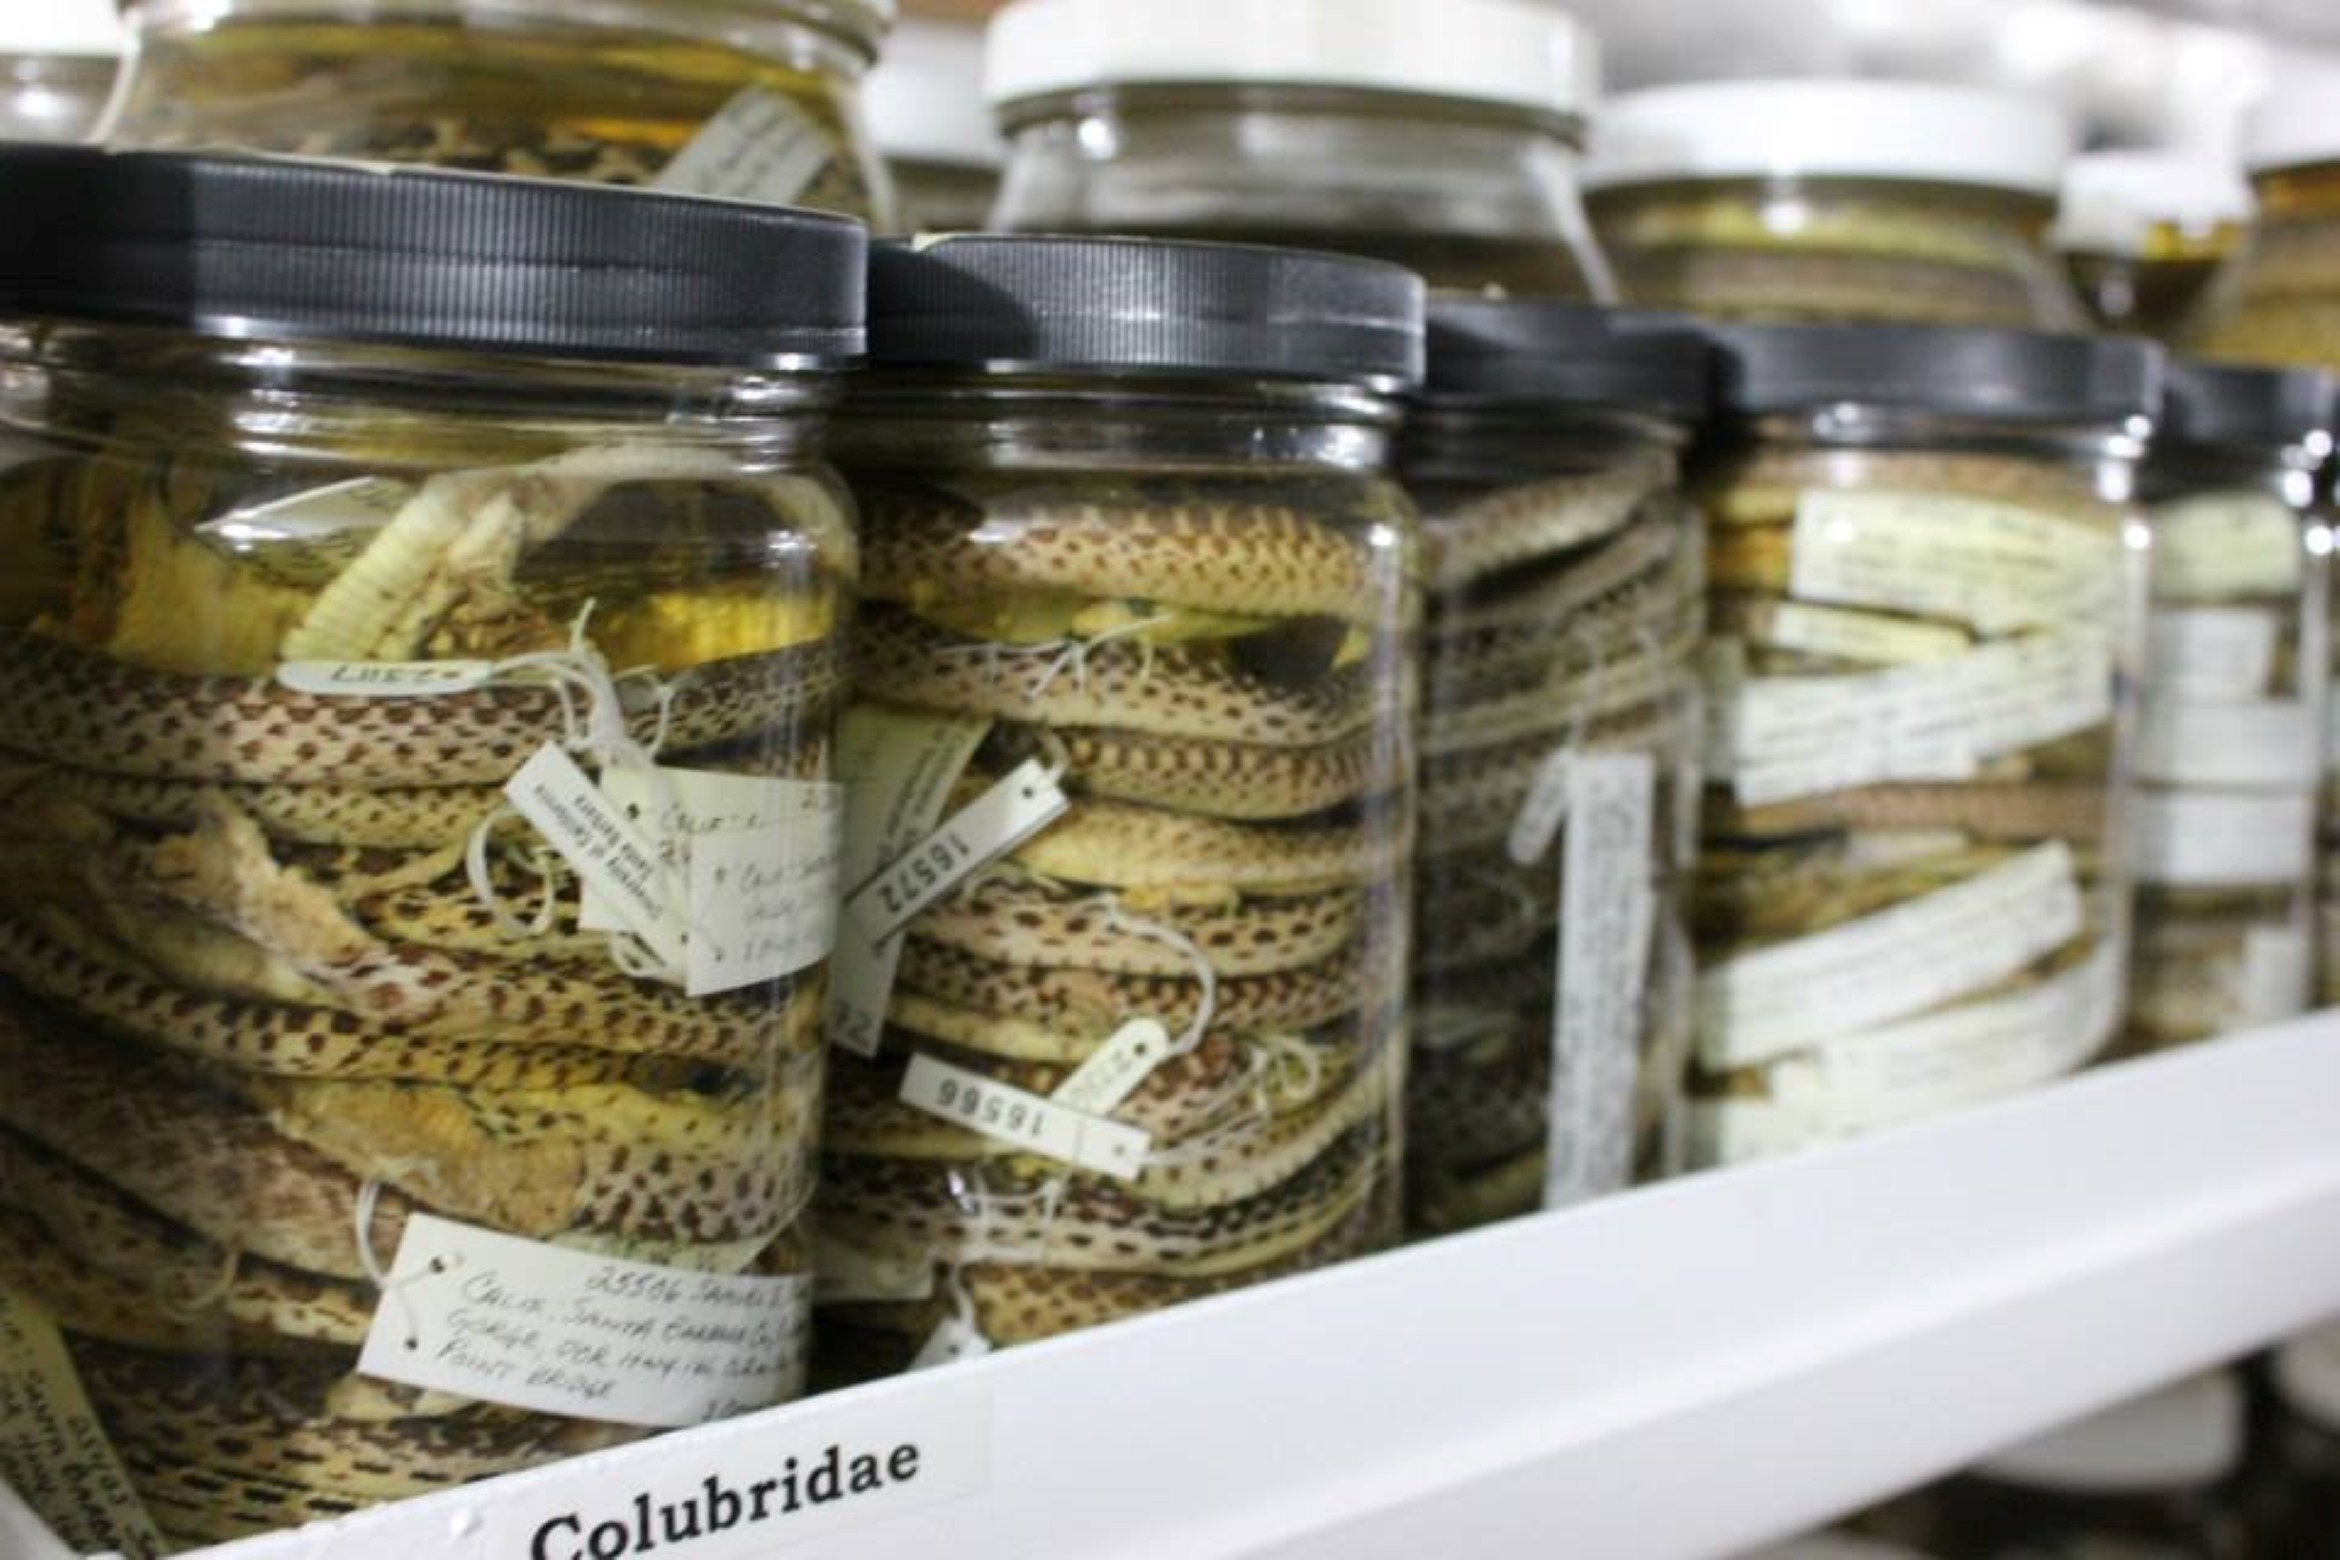 Snakes in jars with liquid lined up on a shelf like pickles